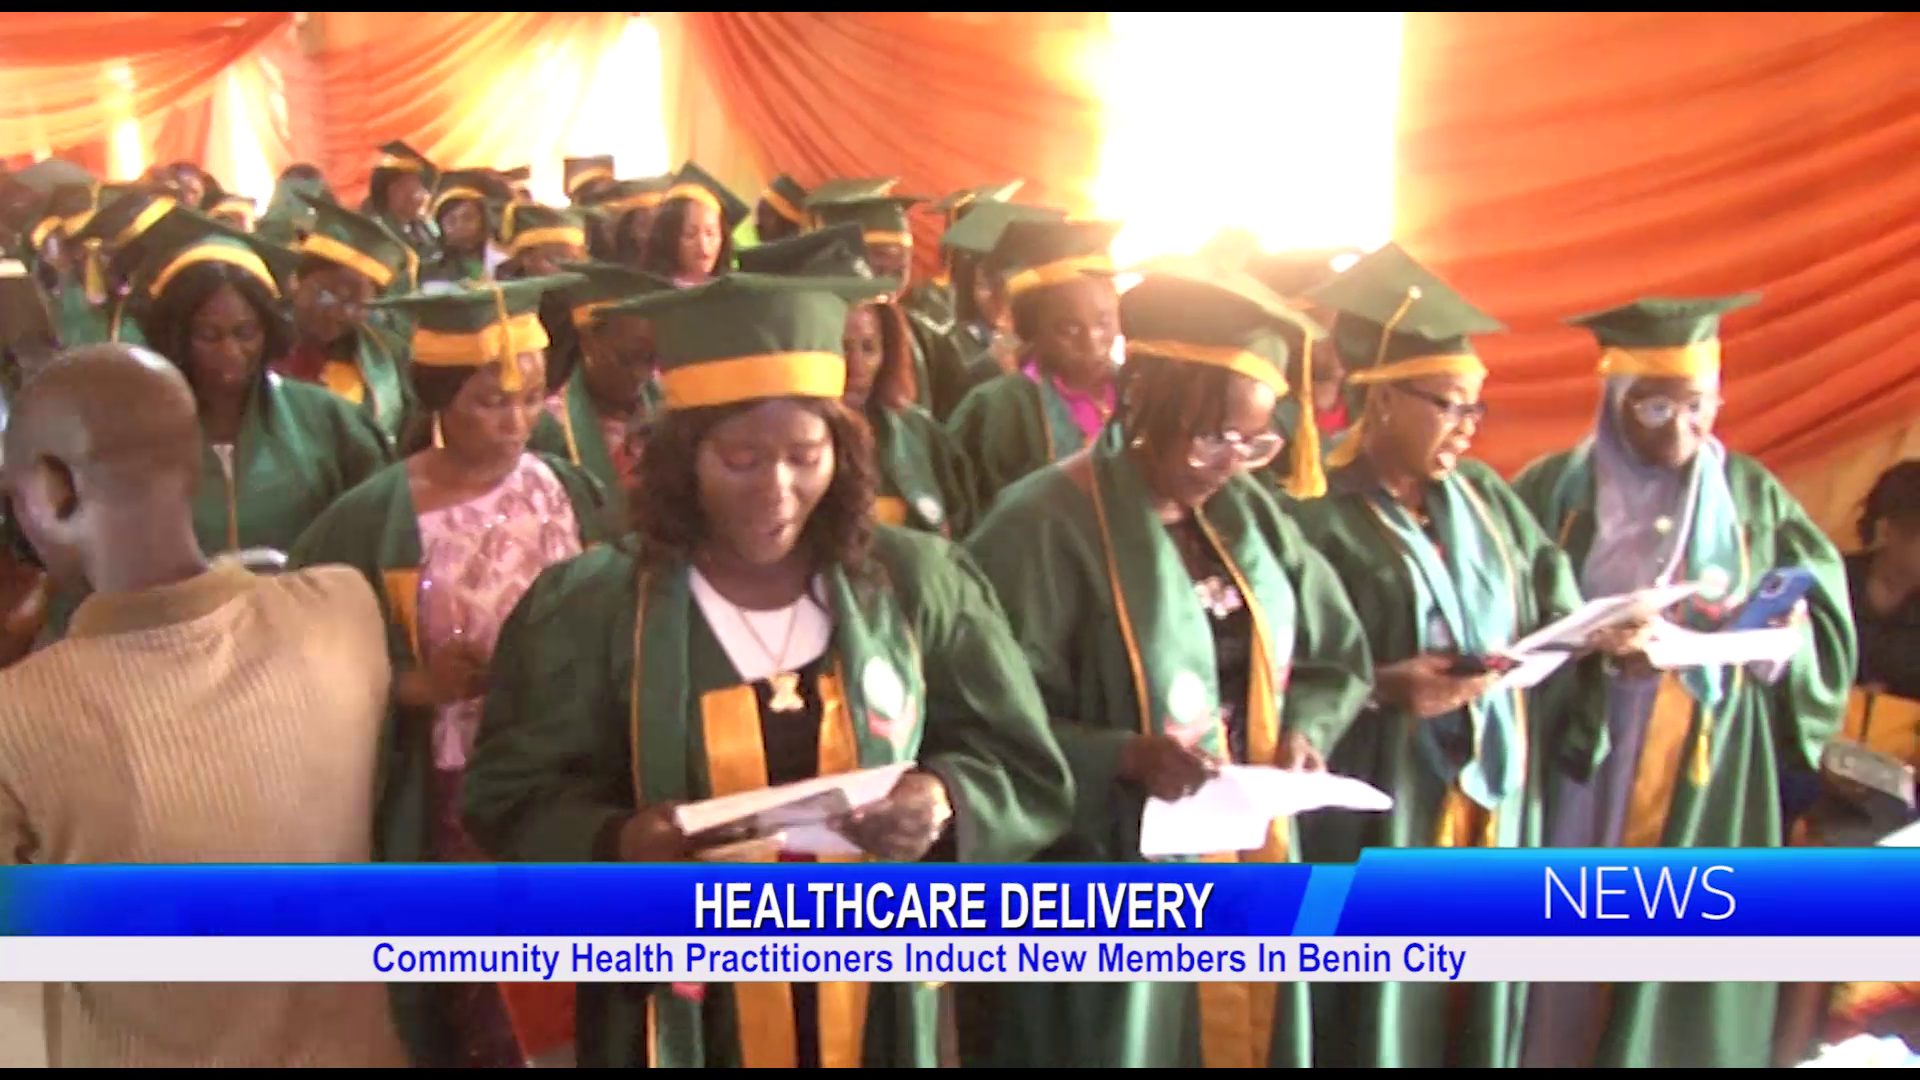 Community Health Practitioners Inducts New Members In Benin City